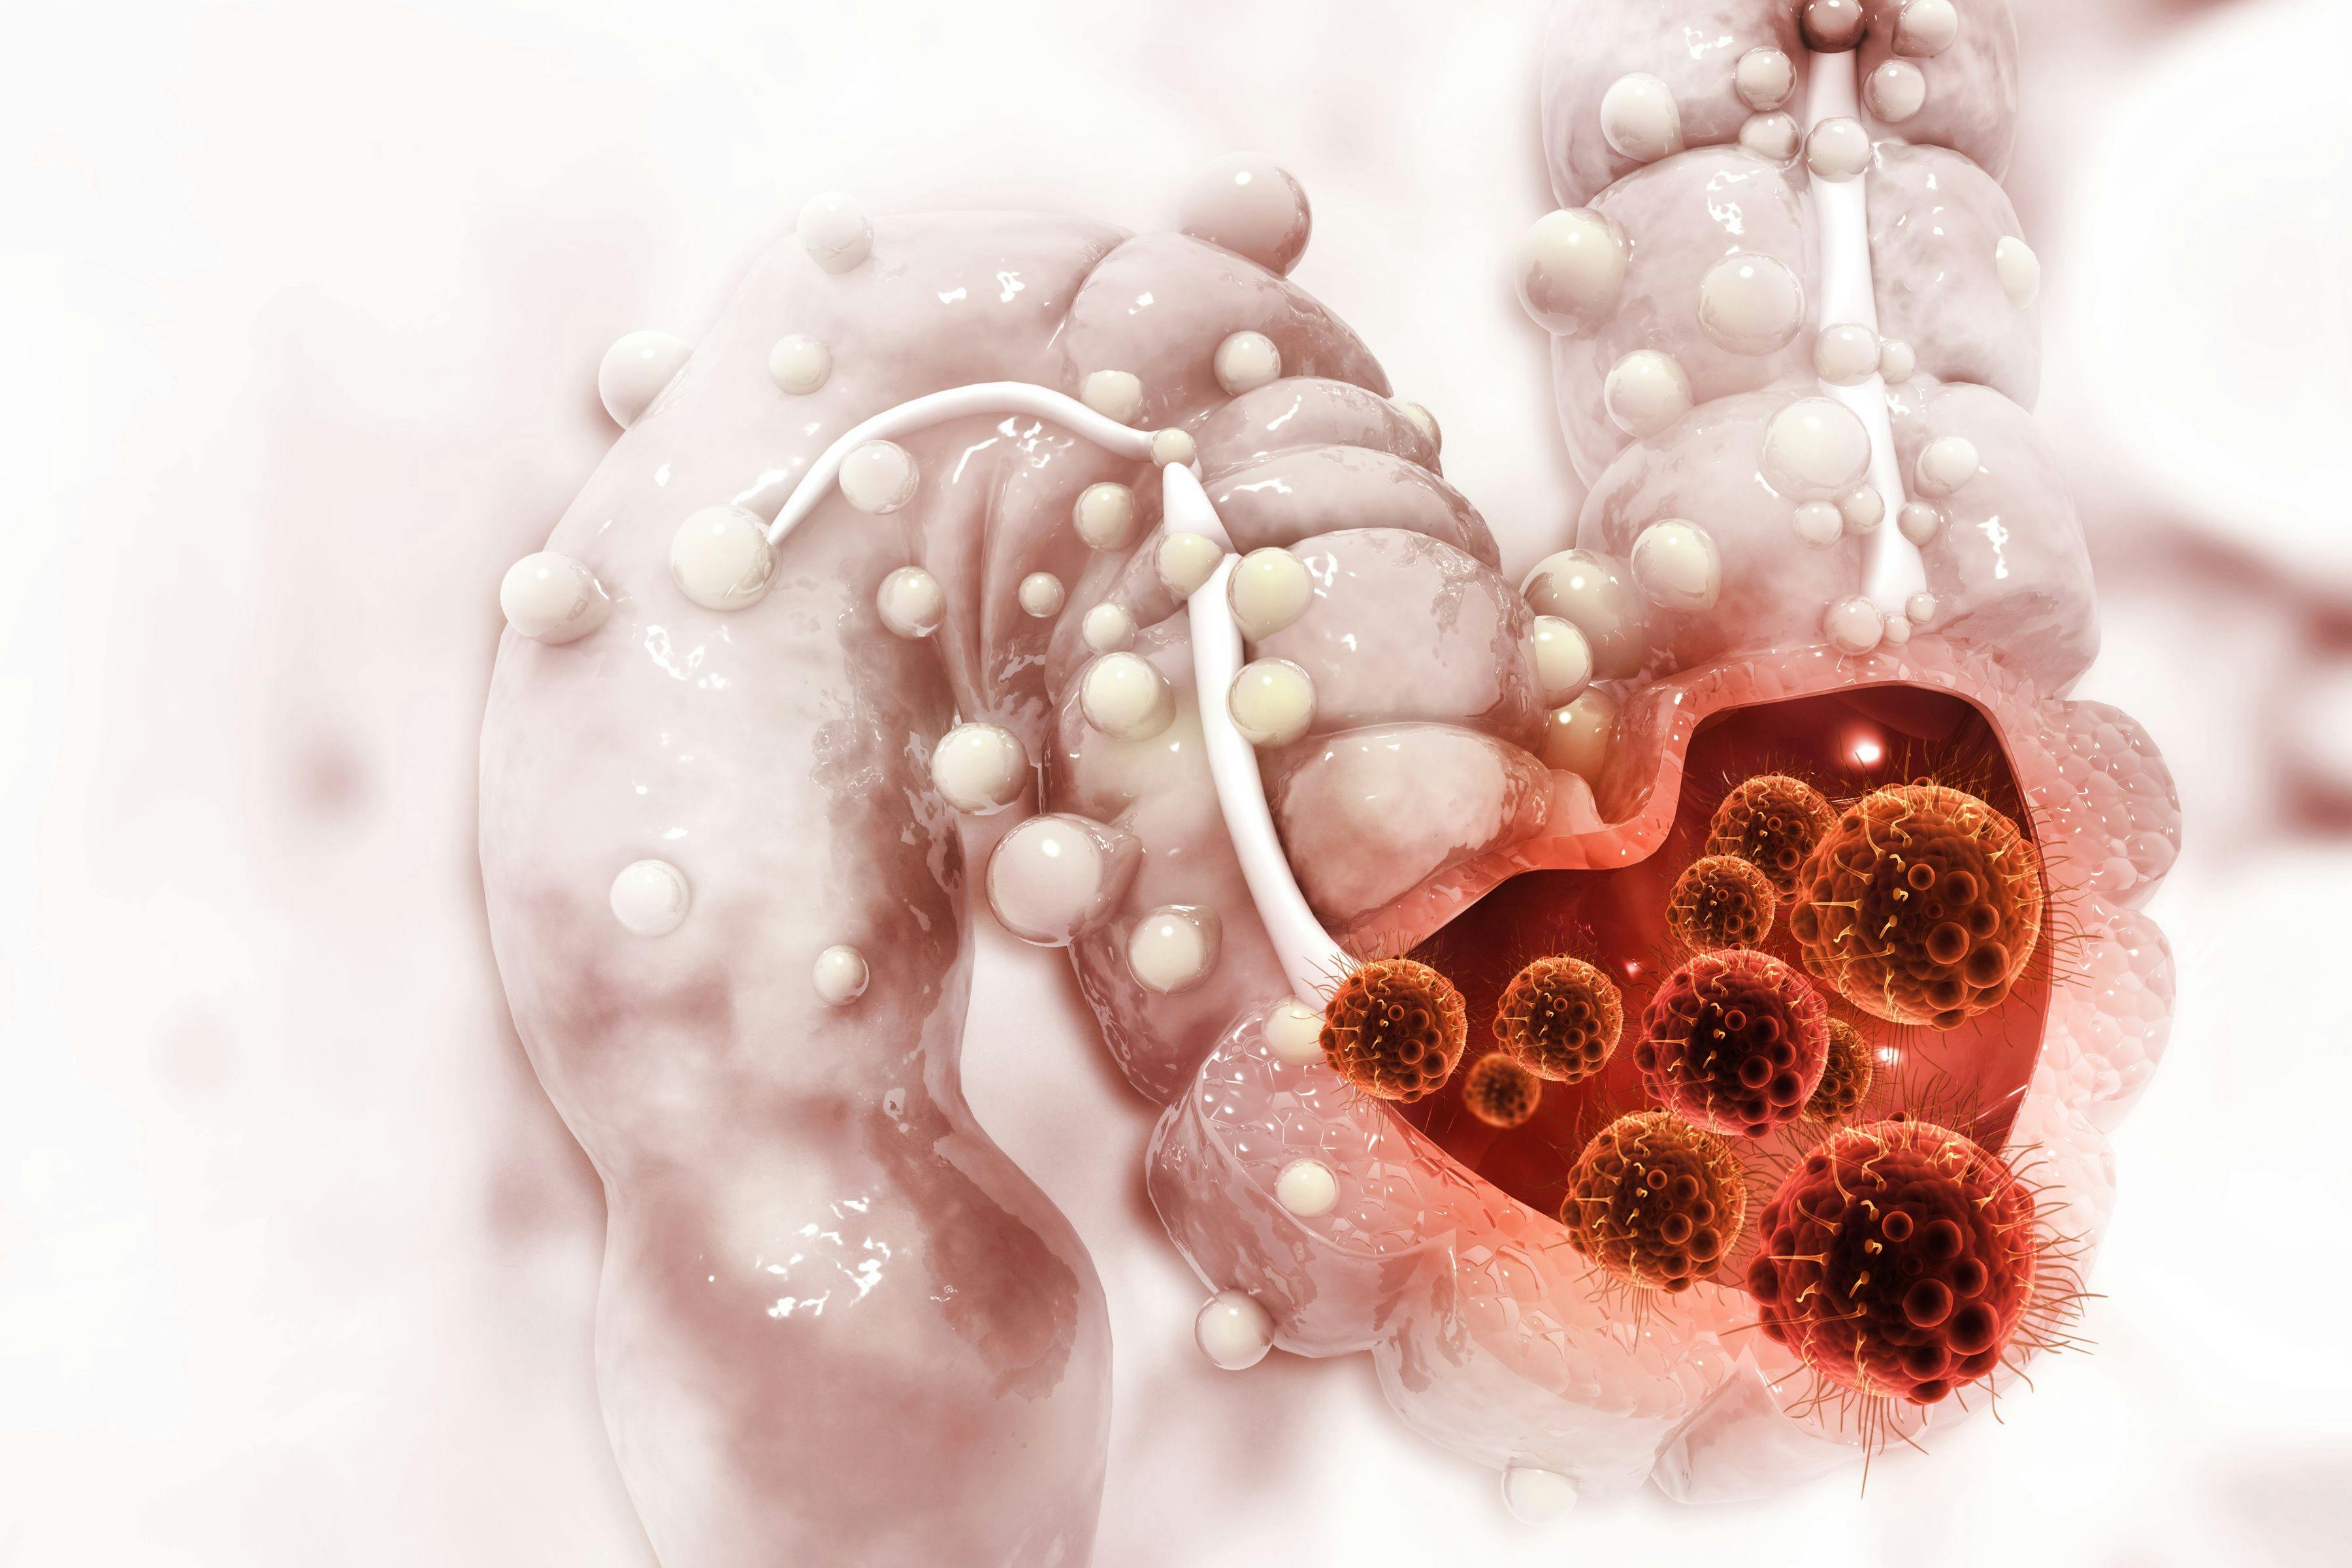 [Colon cancer. Cancer attacking cell. Colon disease concept. 3d illustration] Image Credit: ©  [Crystal light] - [stock.adobe.com]